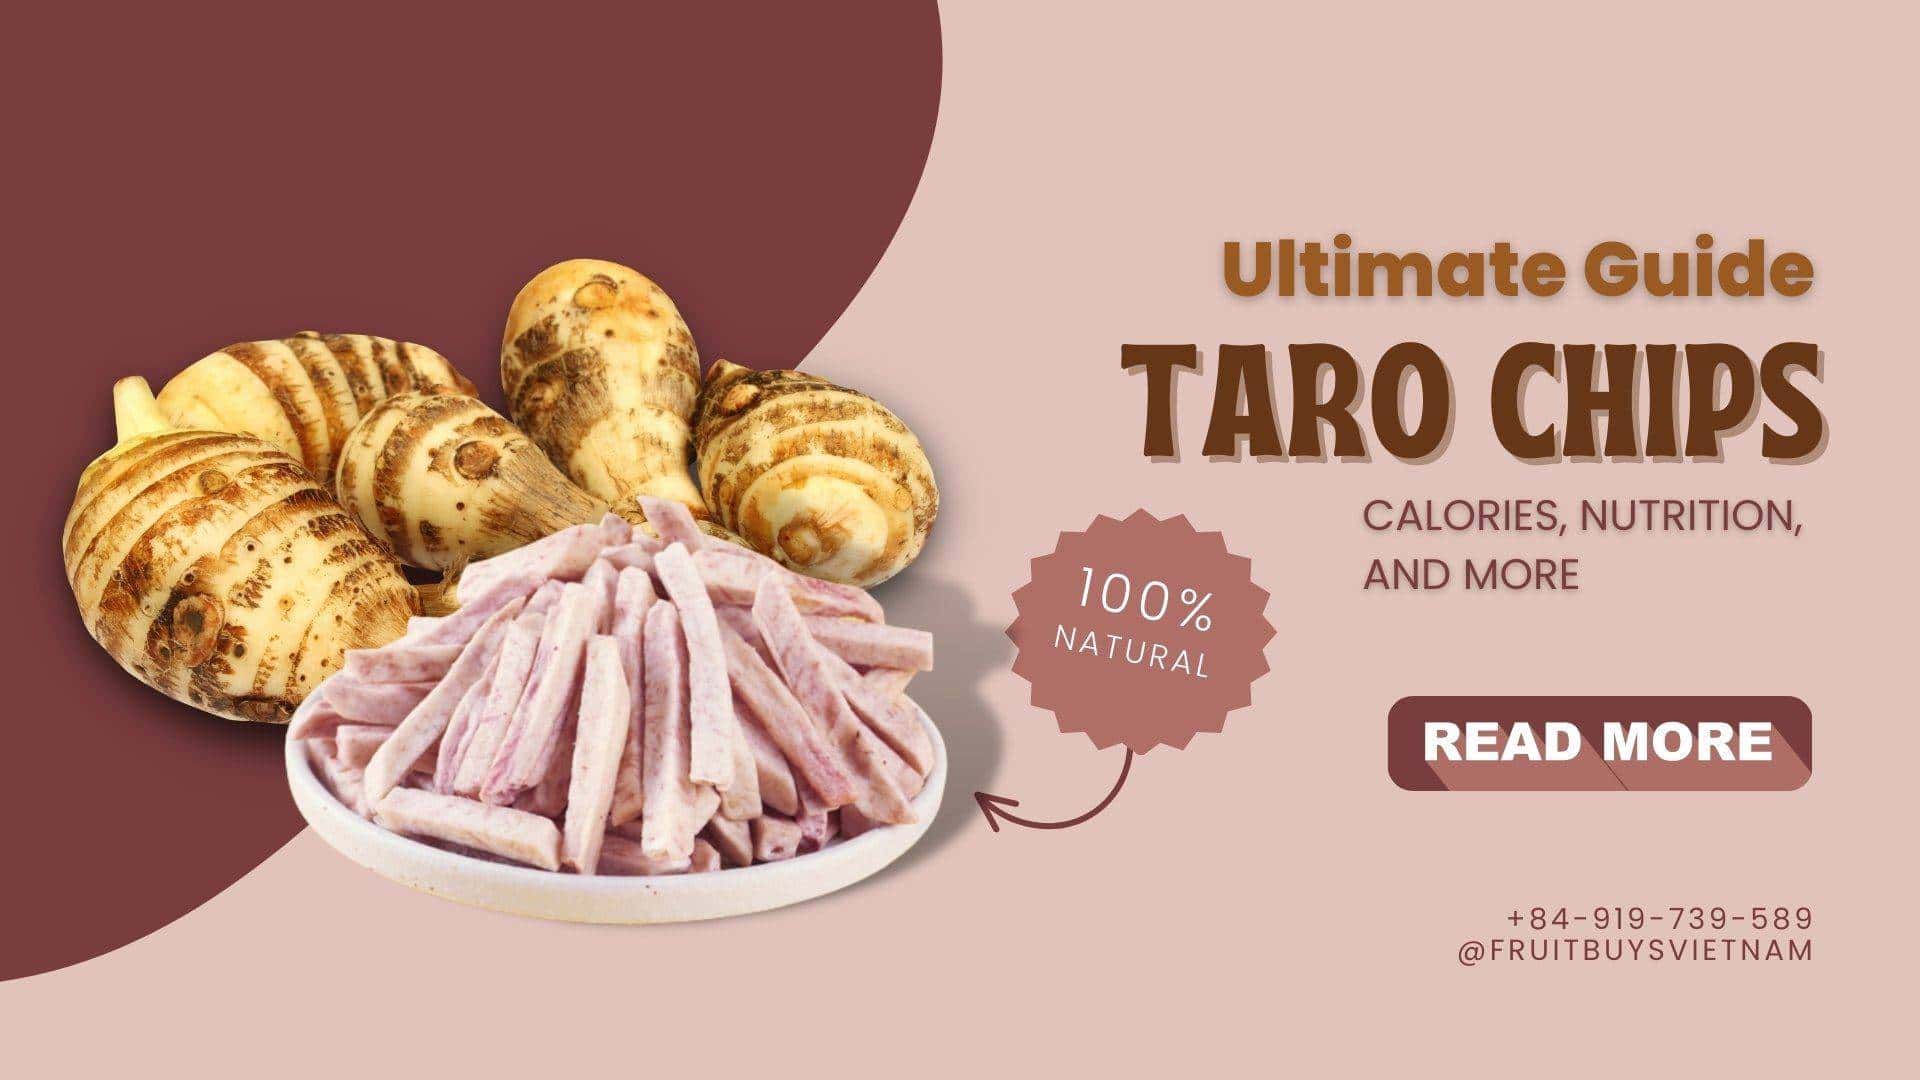 FruitBuys Vietnam  The Ultimate Guide To Taro Chips Calories, Nutrition, And More